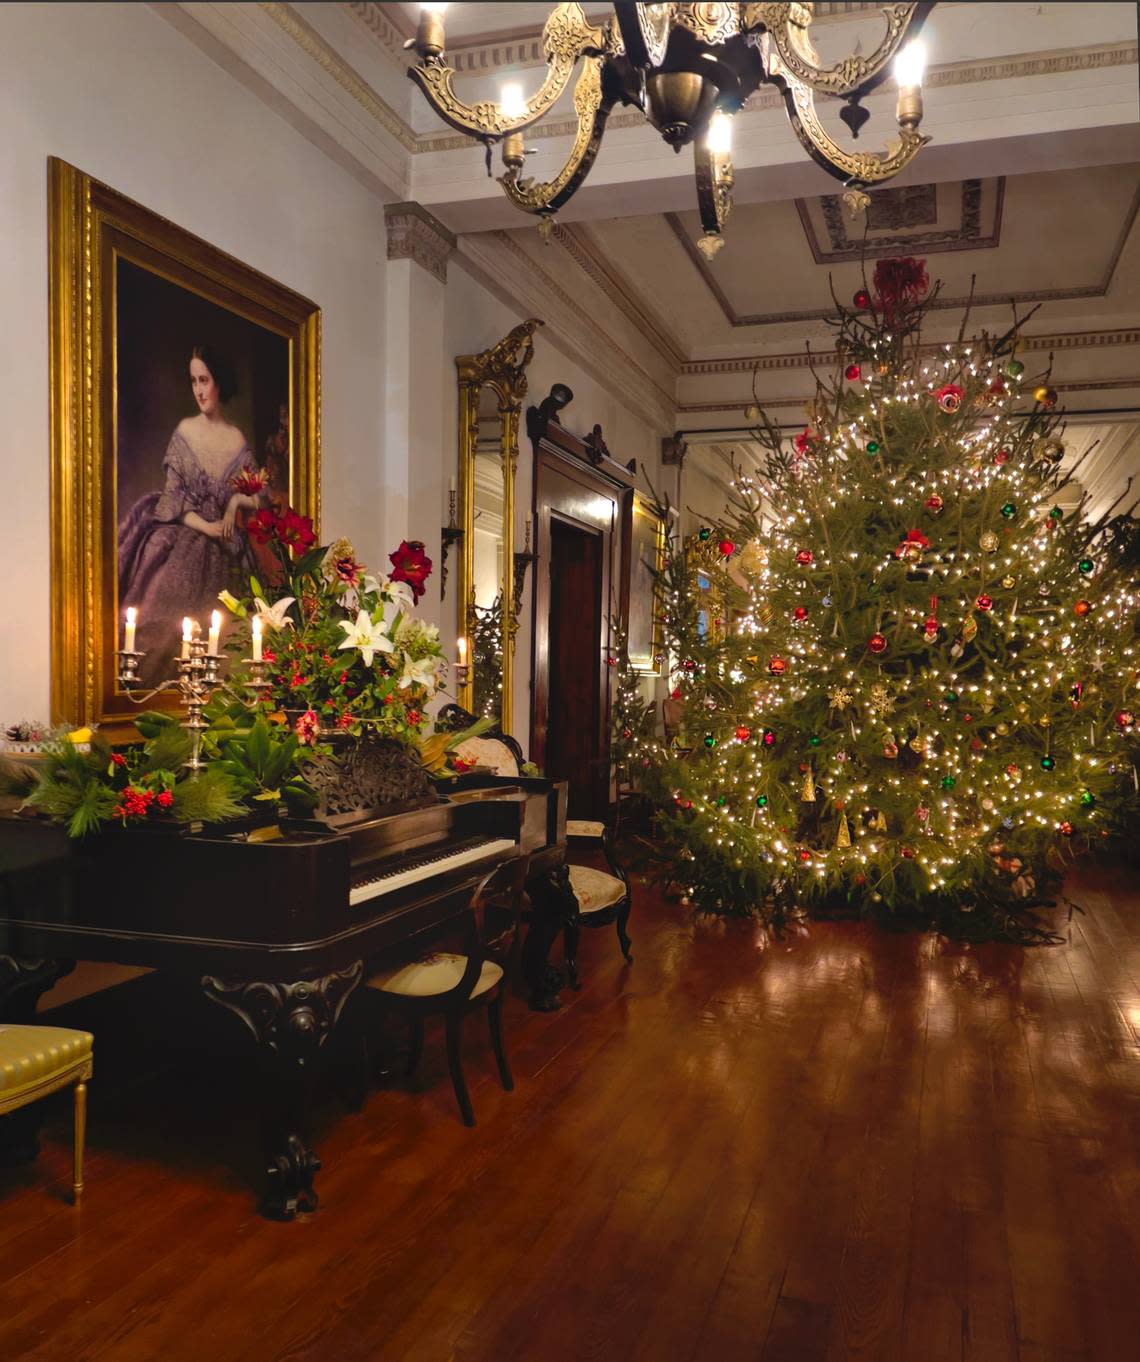 The 12,000-square-foot Ward Hall mansion is decorated for the holidays as it might have been in the 19th century.